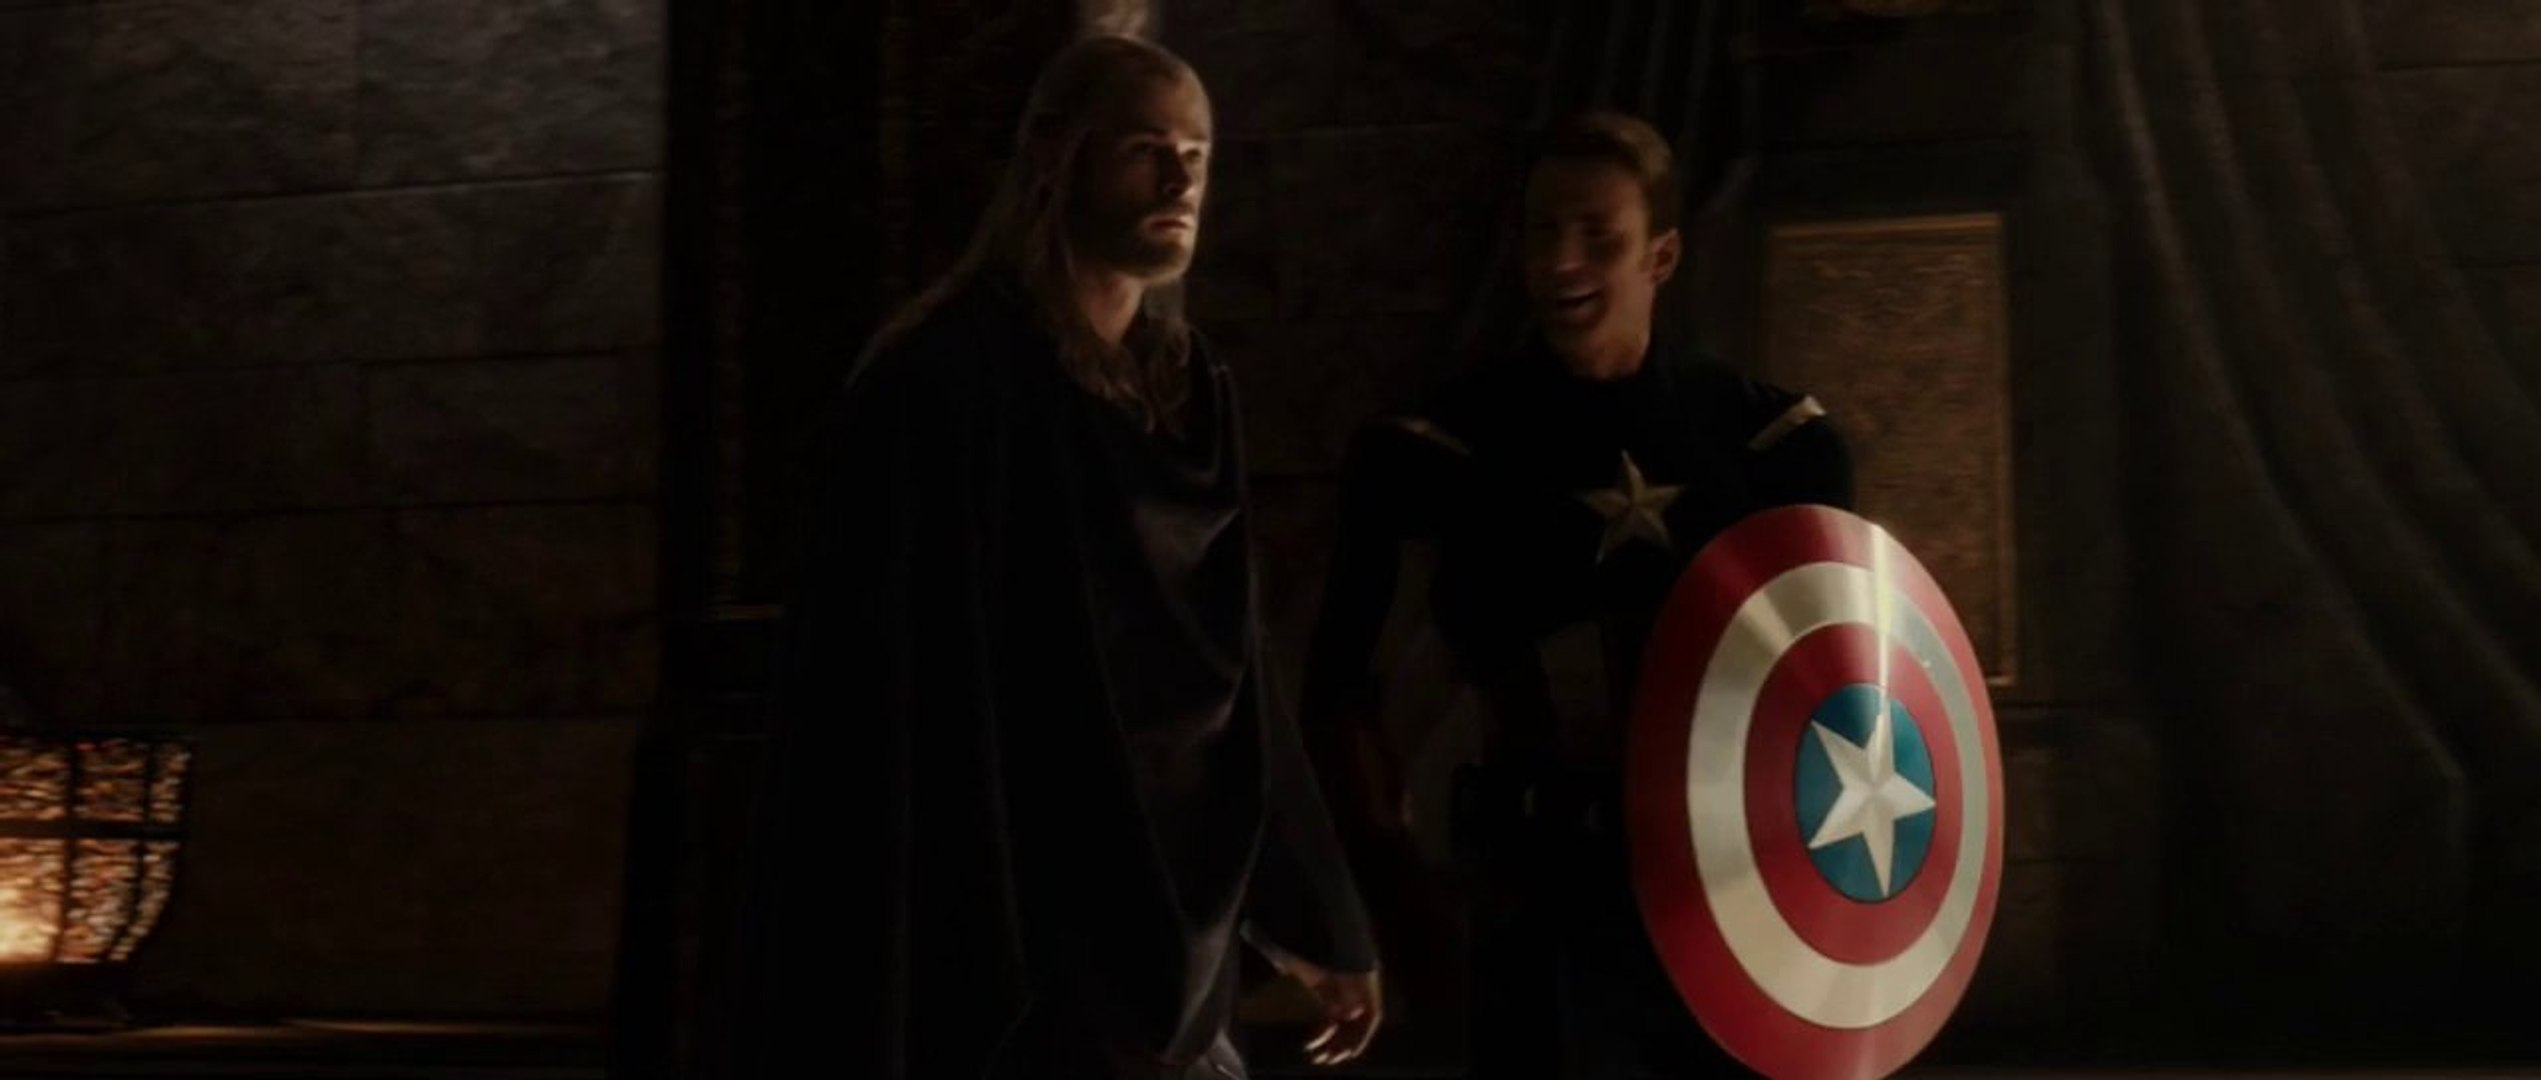 Thor: The Dark World (2013) - Cameo from Captain America [HD] - video  dailymotion